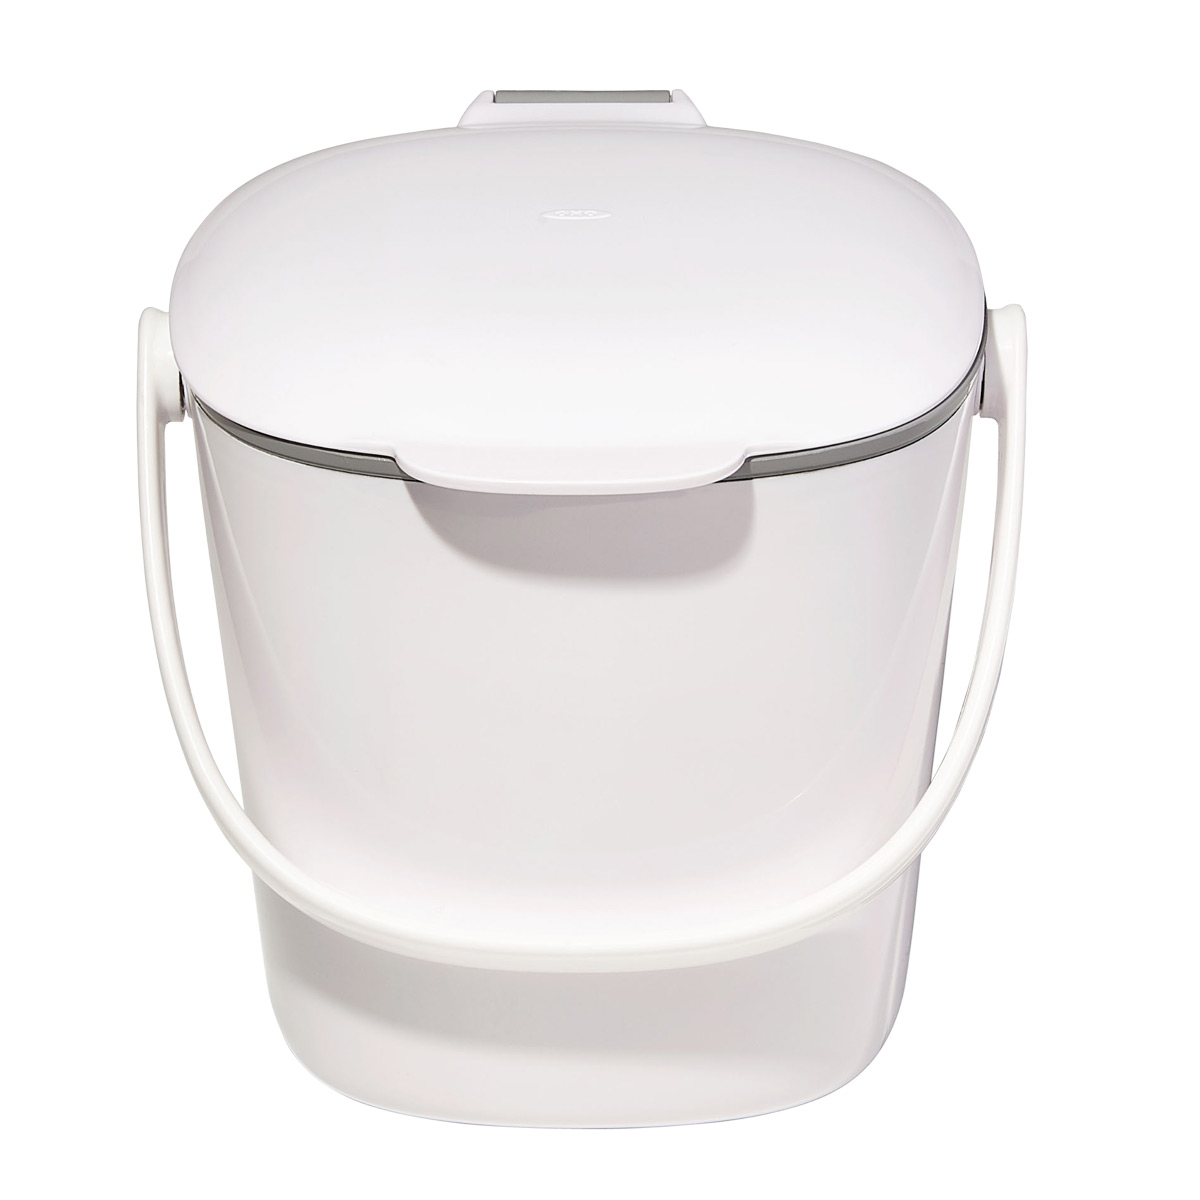 https://www.containerstore.com/catalogimages/384140/10054760-OXO-Compost-Bin-VEN1.jpg